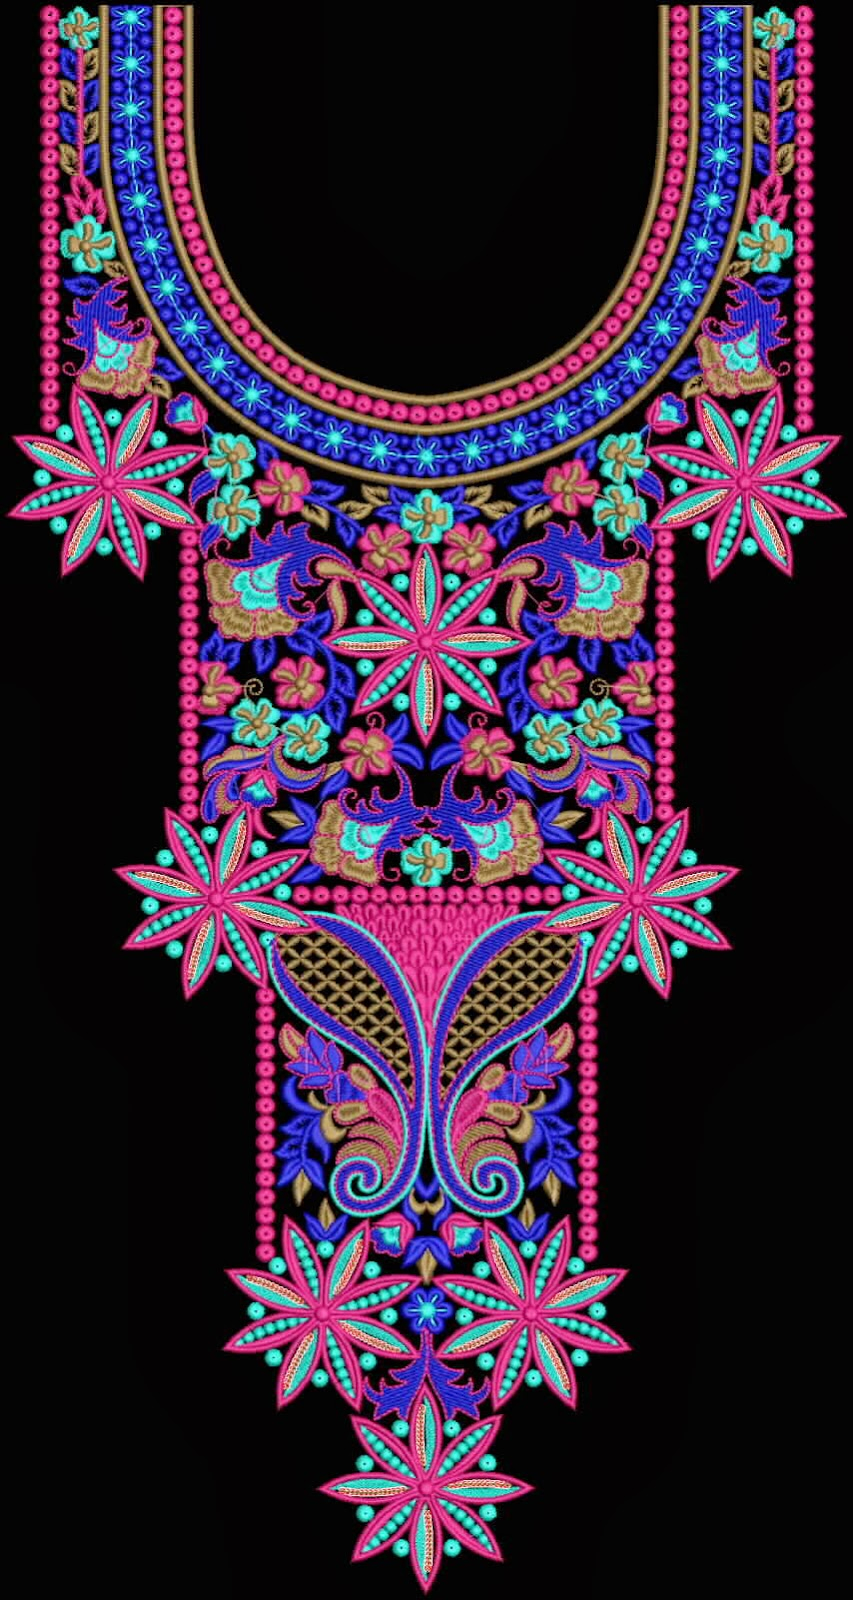 Embroidery Patterns For Sale Rangja13 Embroidery Designs